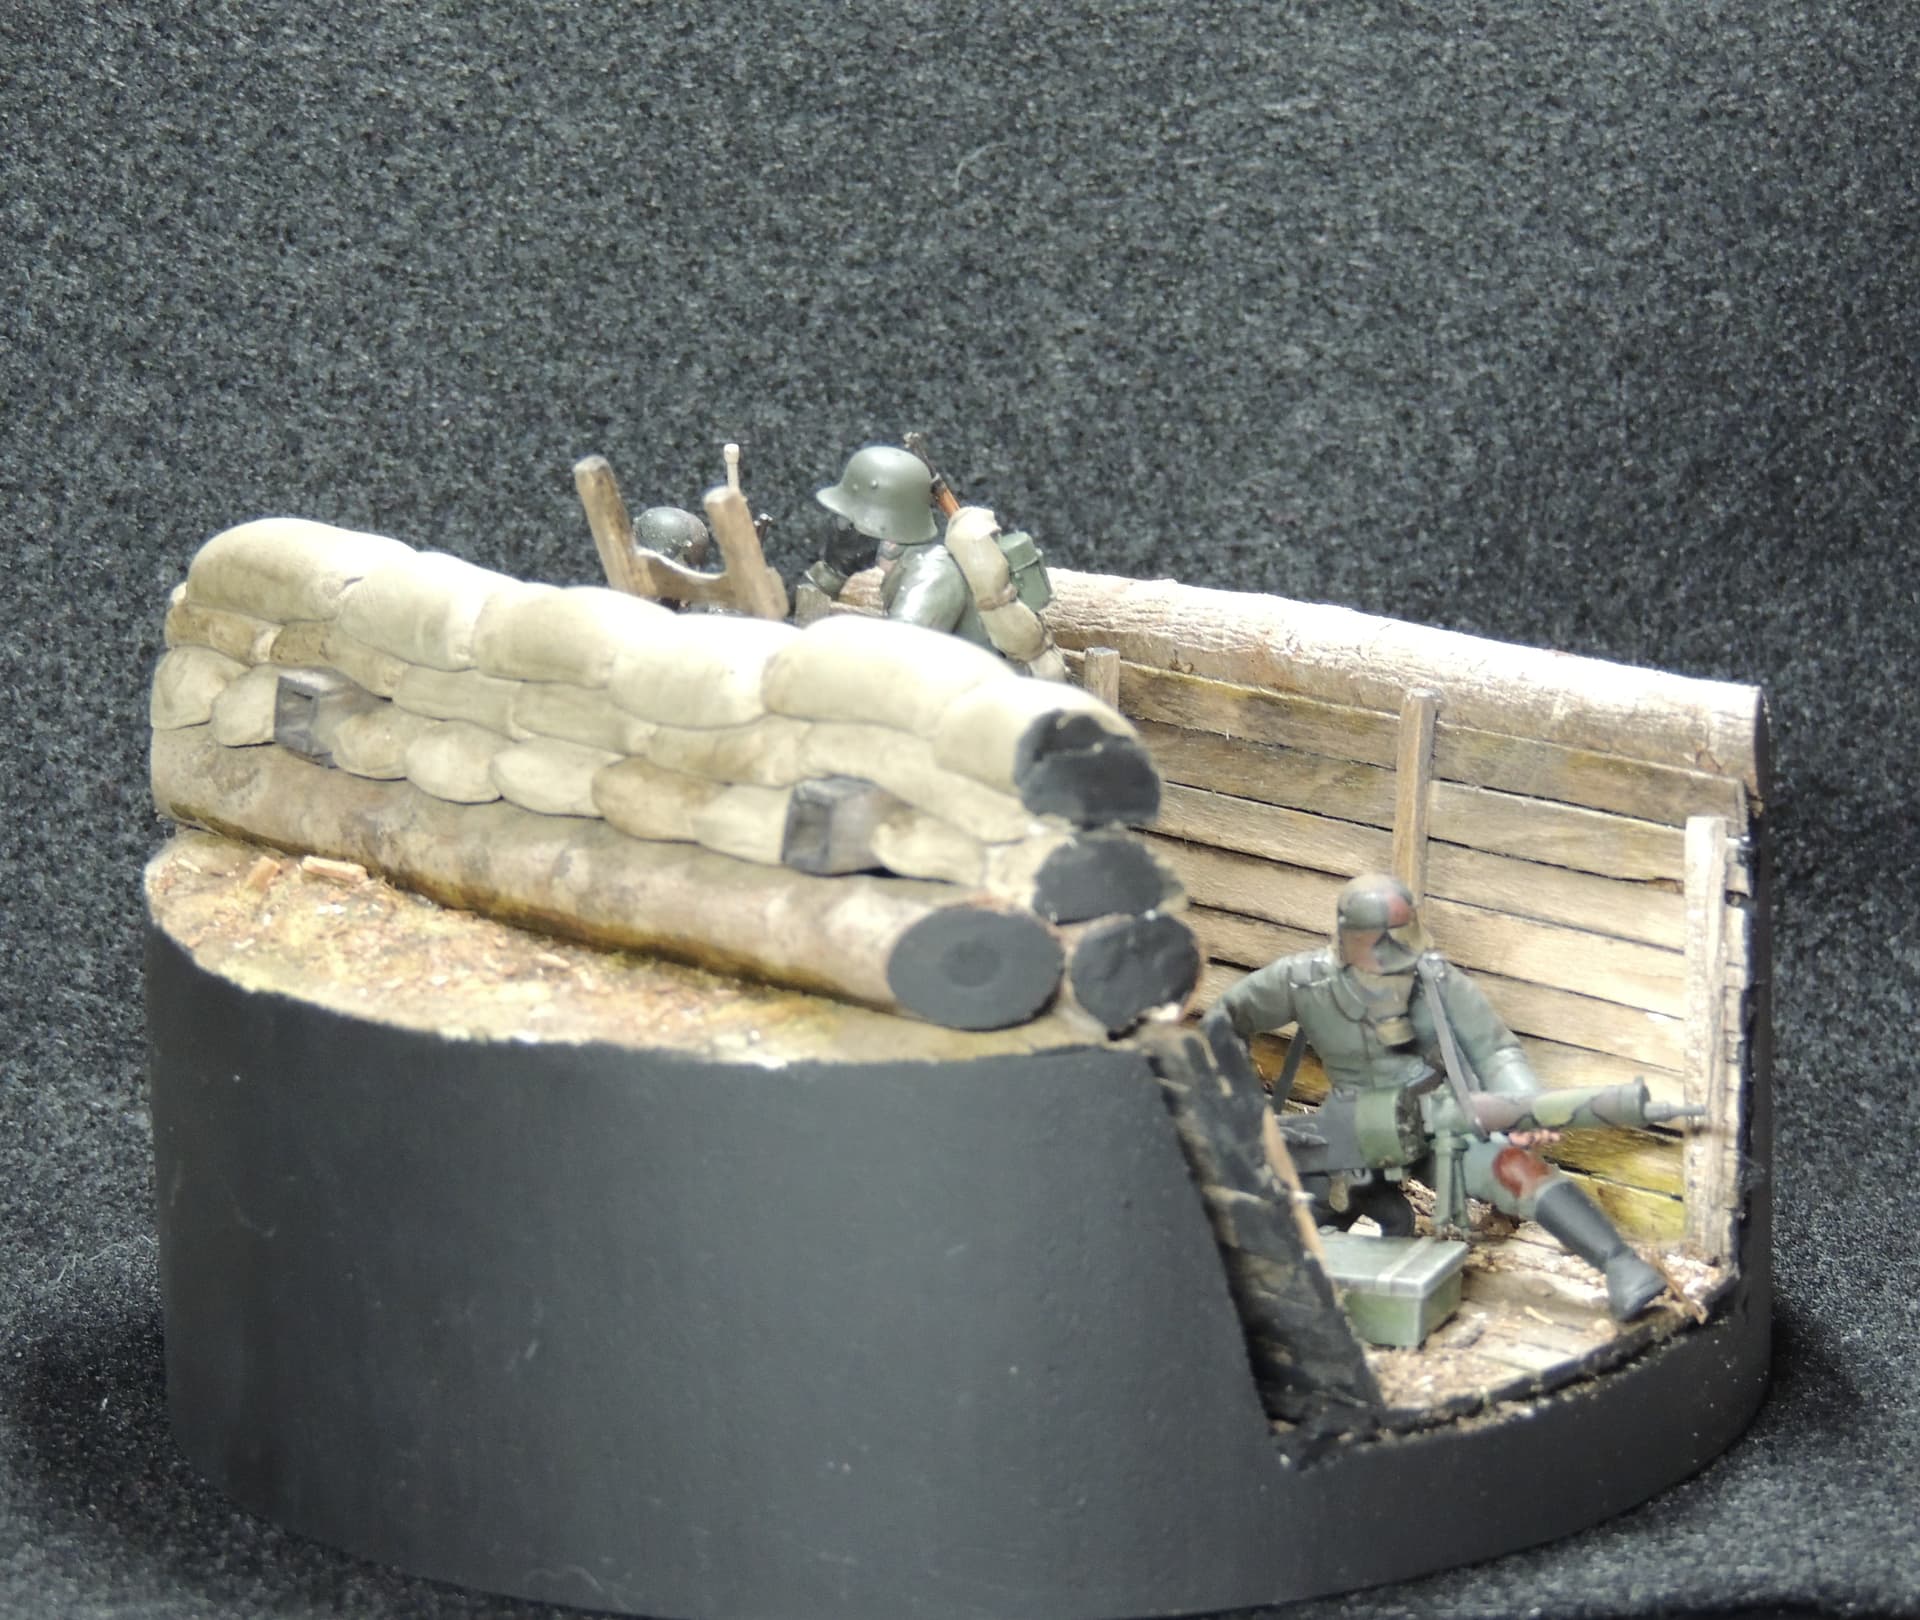 WW1 Trench Diorama update- Sculpey Air-Dry clay is what I use for sandbags  in my dioramas. 